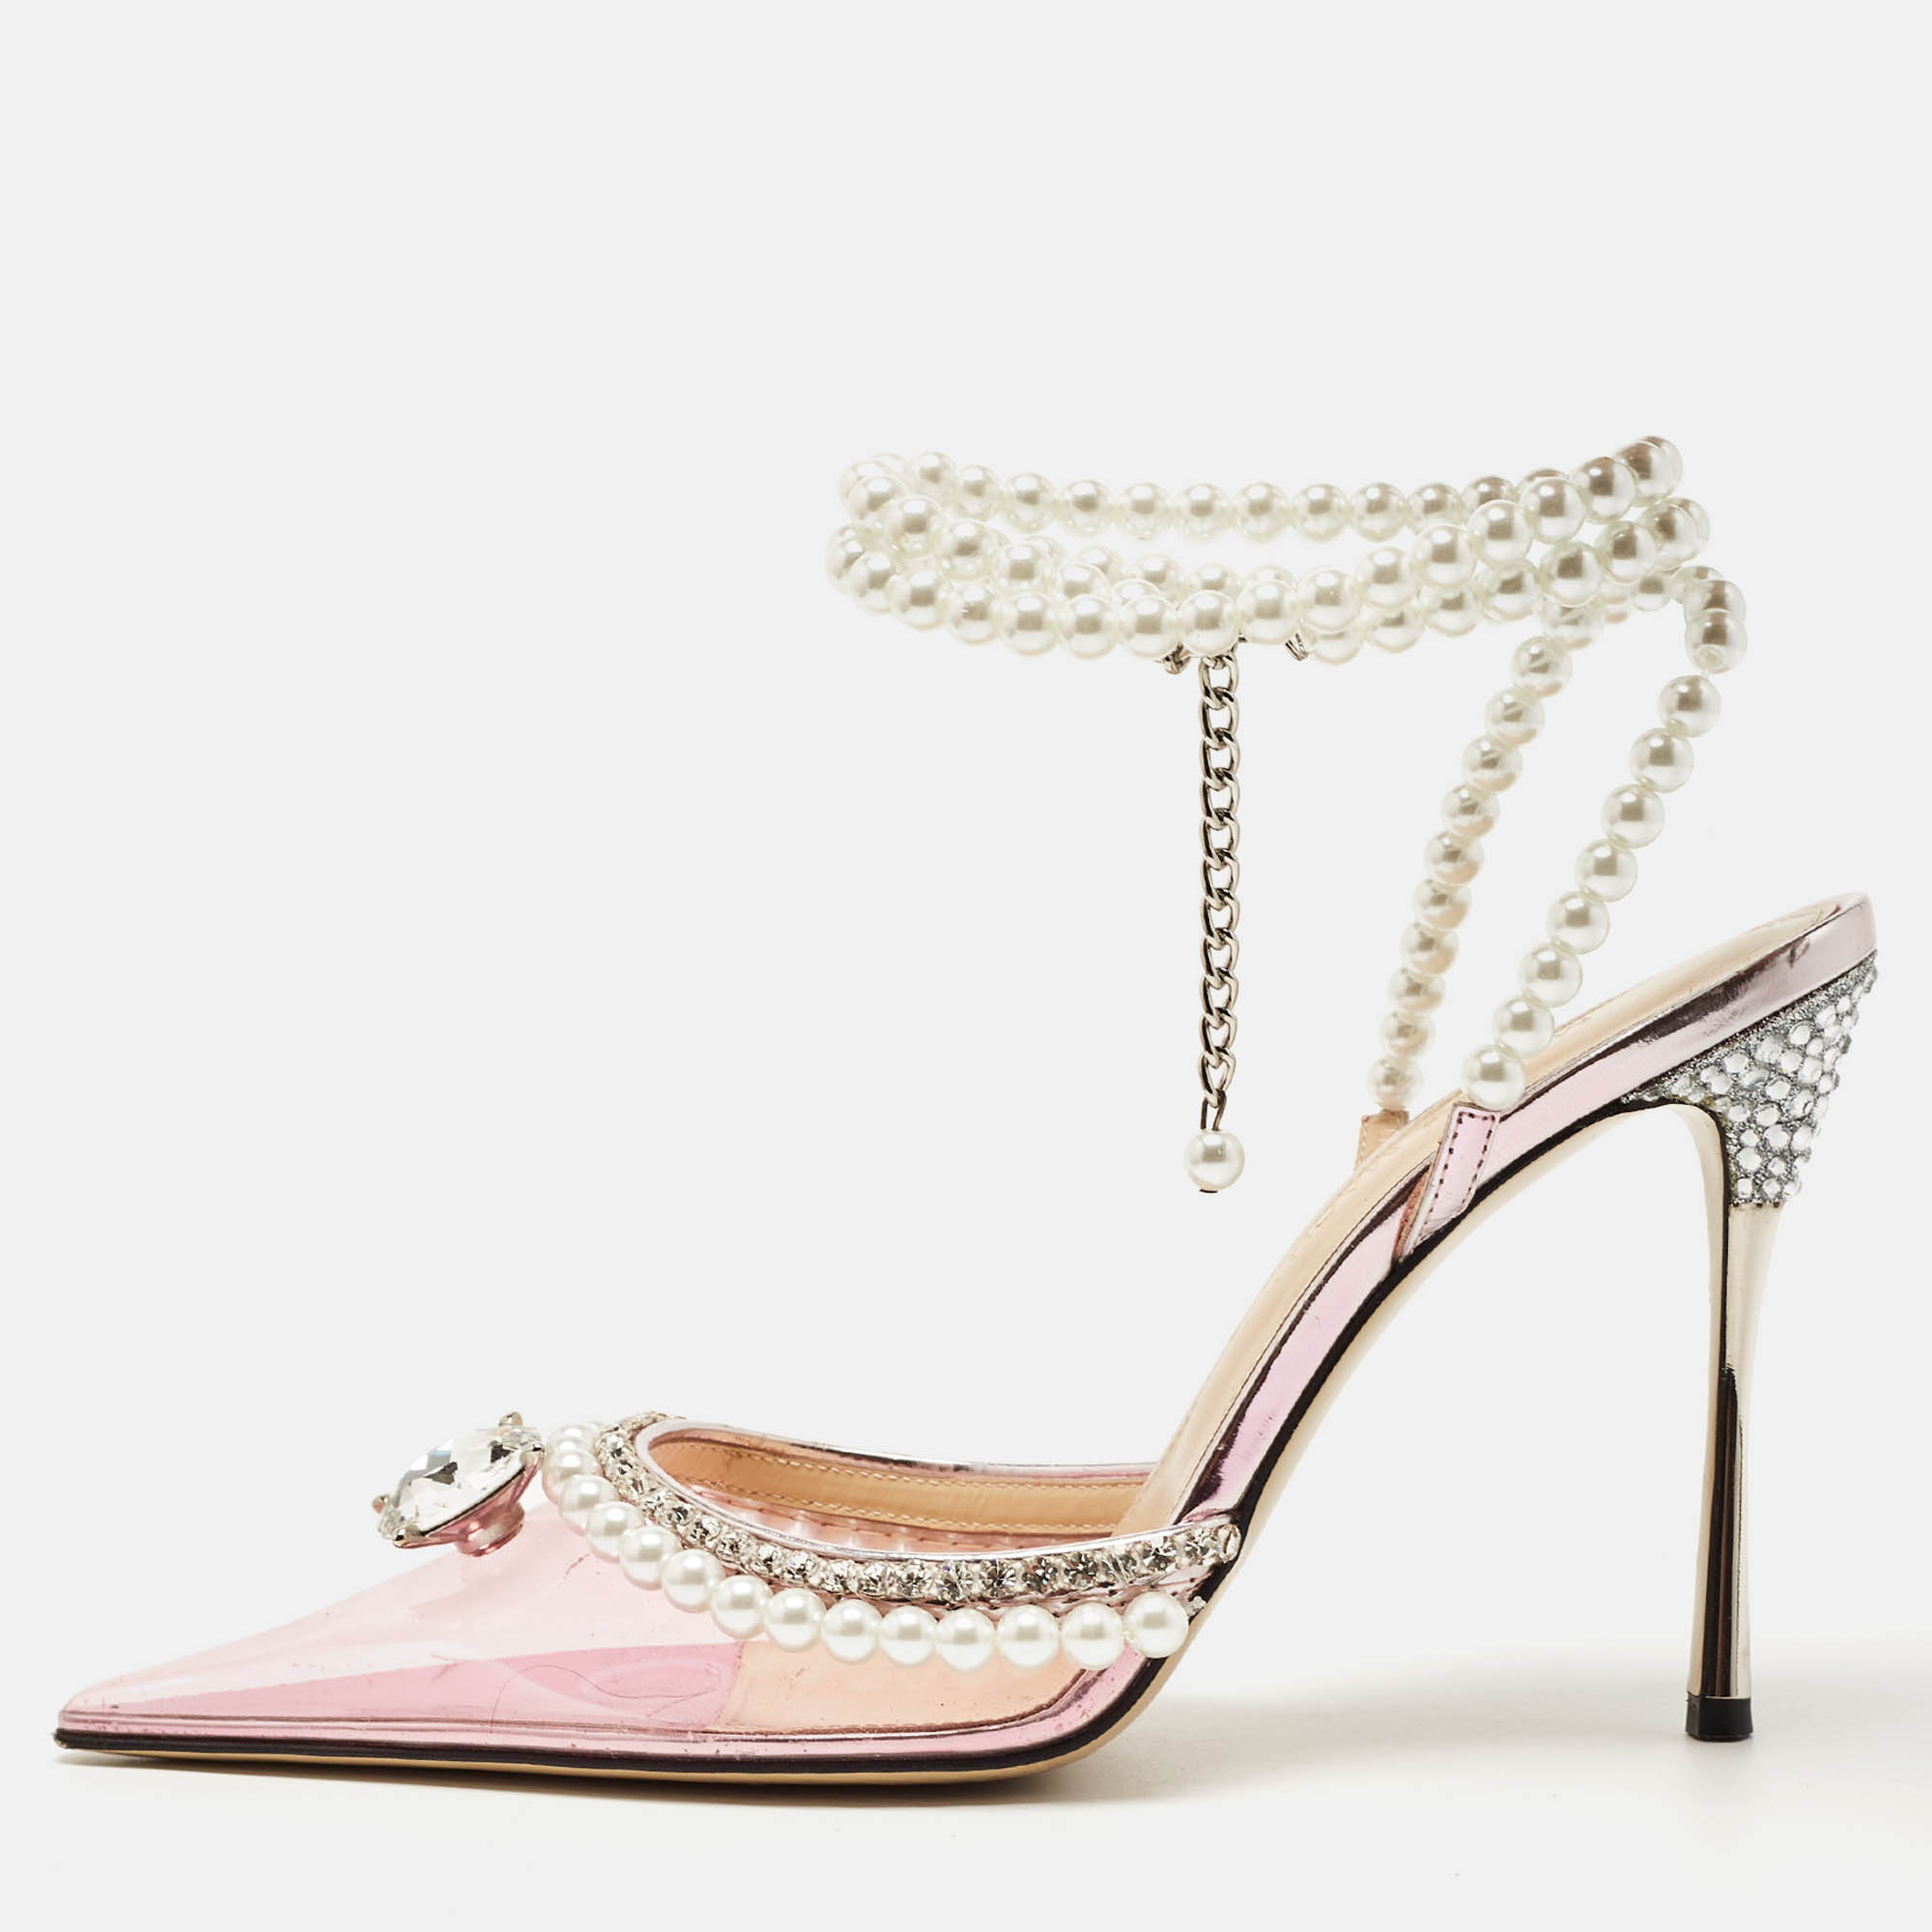 Mach & mach pink pvc crystal and pearl embellished ankle wrap pumps size 38